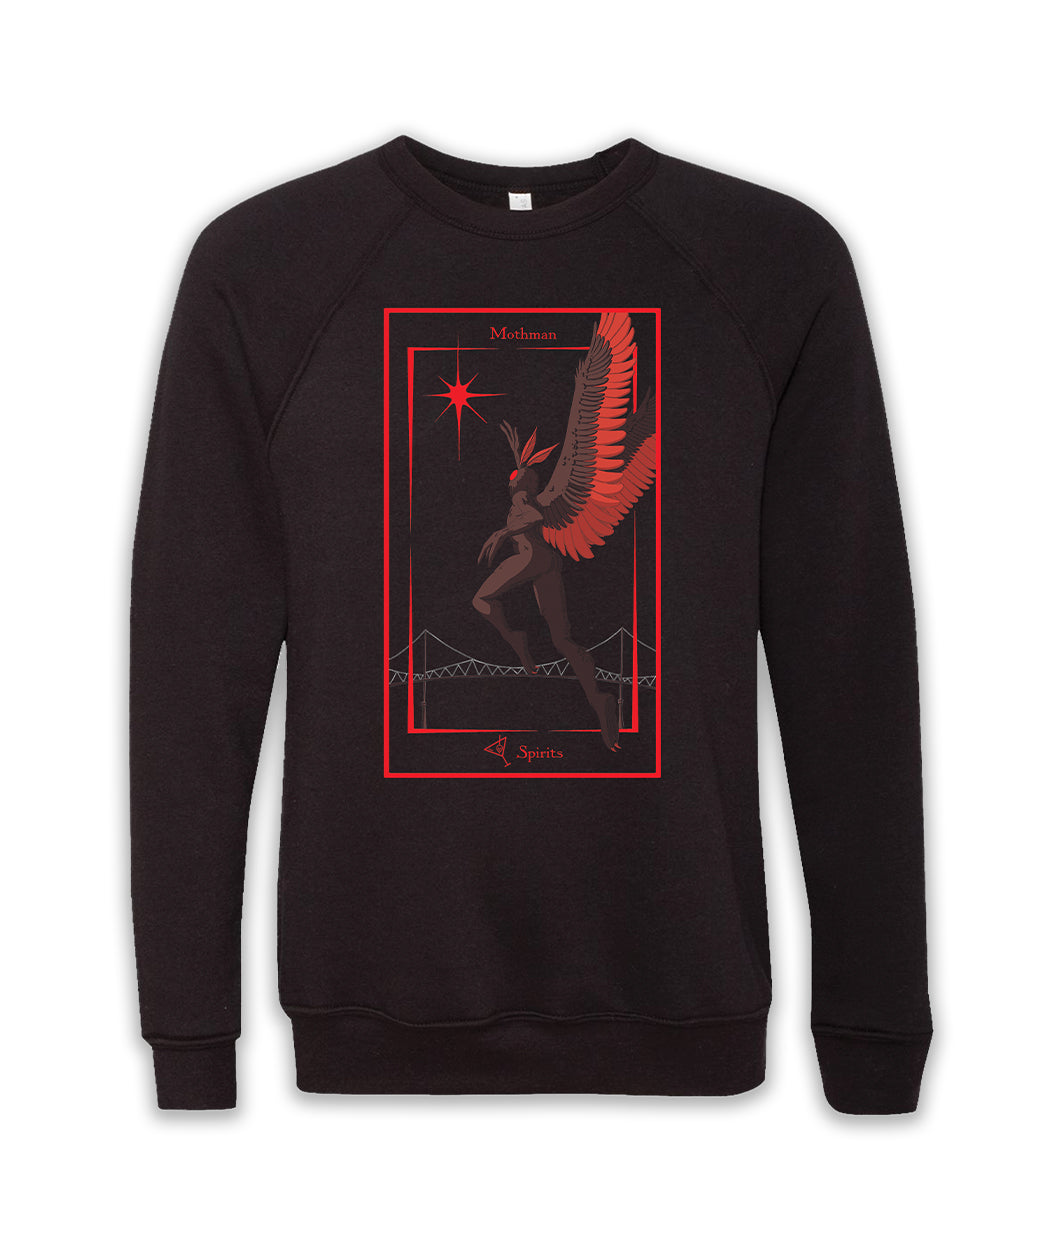 A black crewneck sweater with a dark red mothman with red wings reaching up towards a red star. In the distance is a line drawing of a white bridge. Two red outline rectangles surround the mothman. “Mothman” is in red serif font between the rectangles at the top. The spirits logo is on the bottom - from Spirits